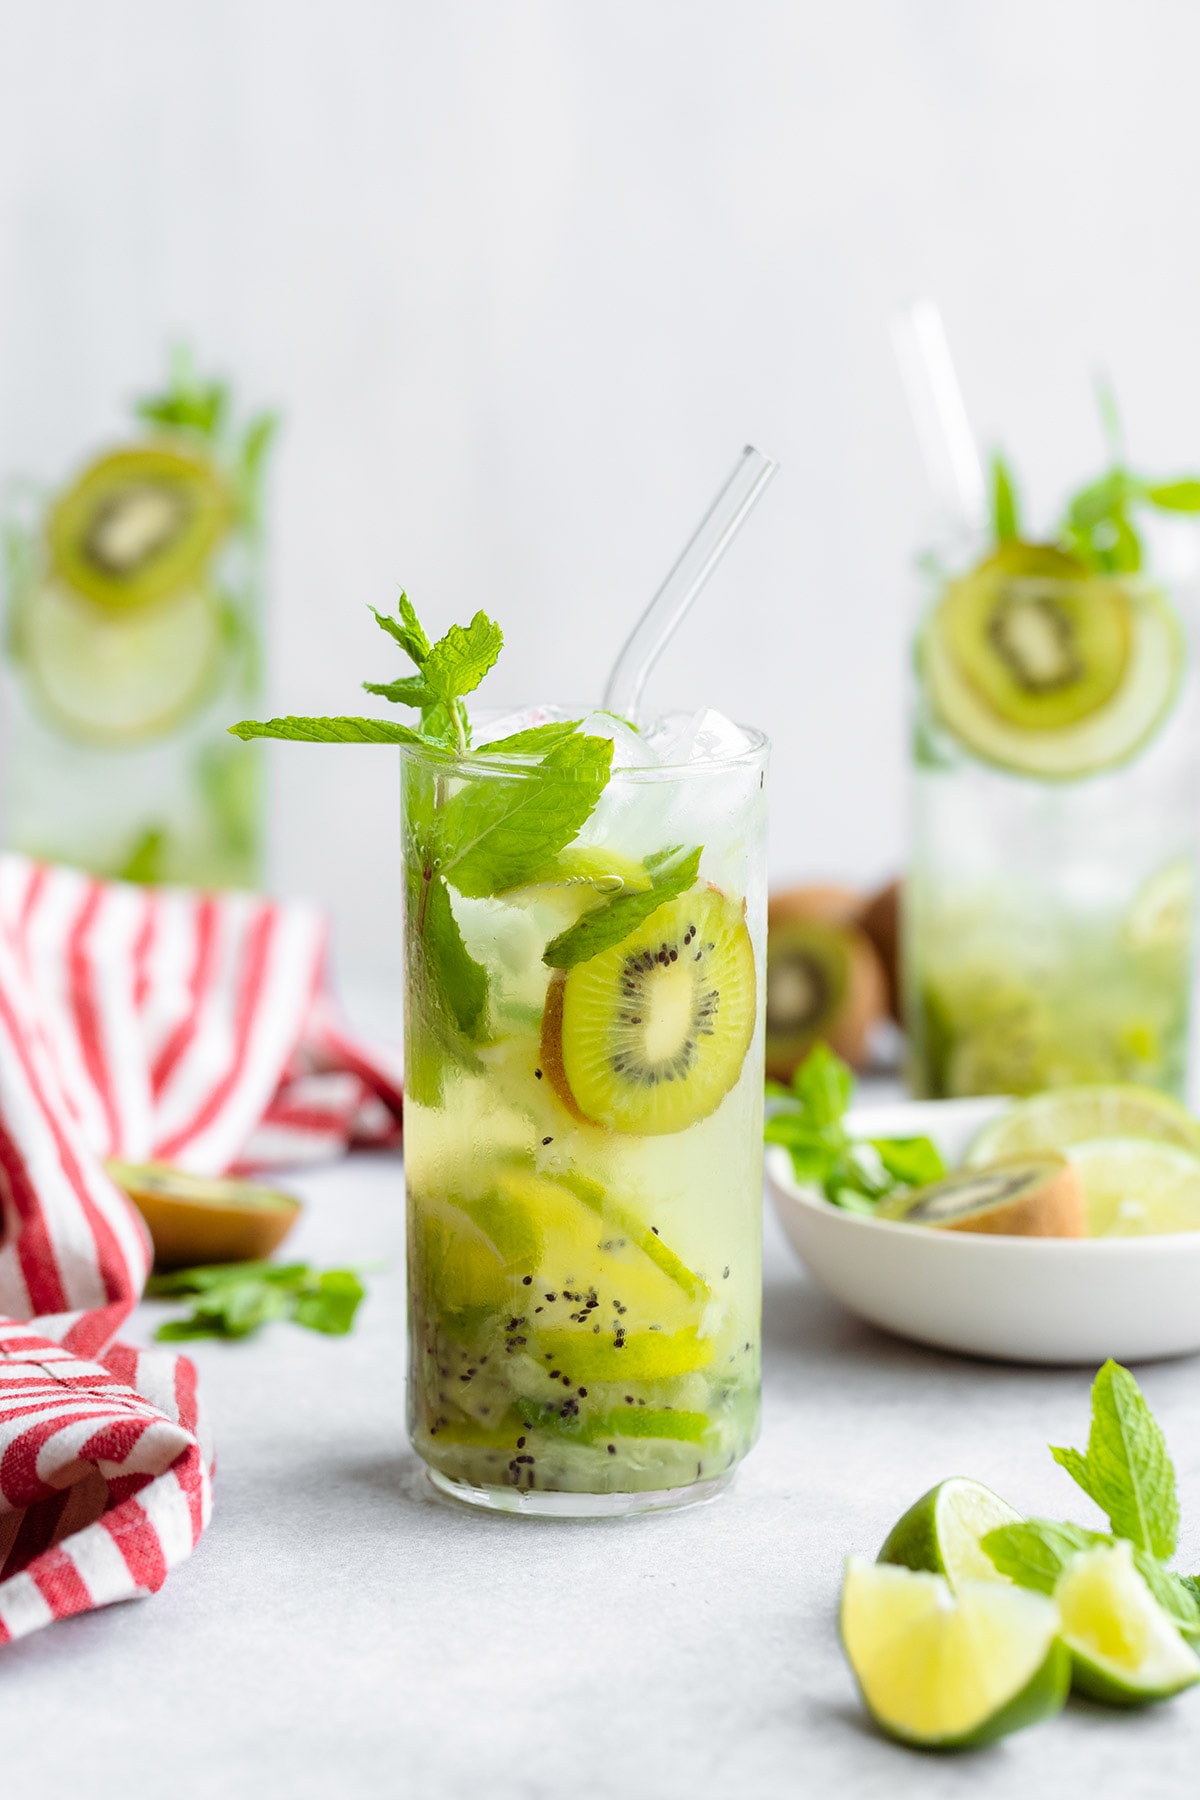 Three Kiwi Mojitos in tall glasses garnished with lime and kiwi slices. On grey background with a striped red and white kitchen towel on the left.